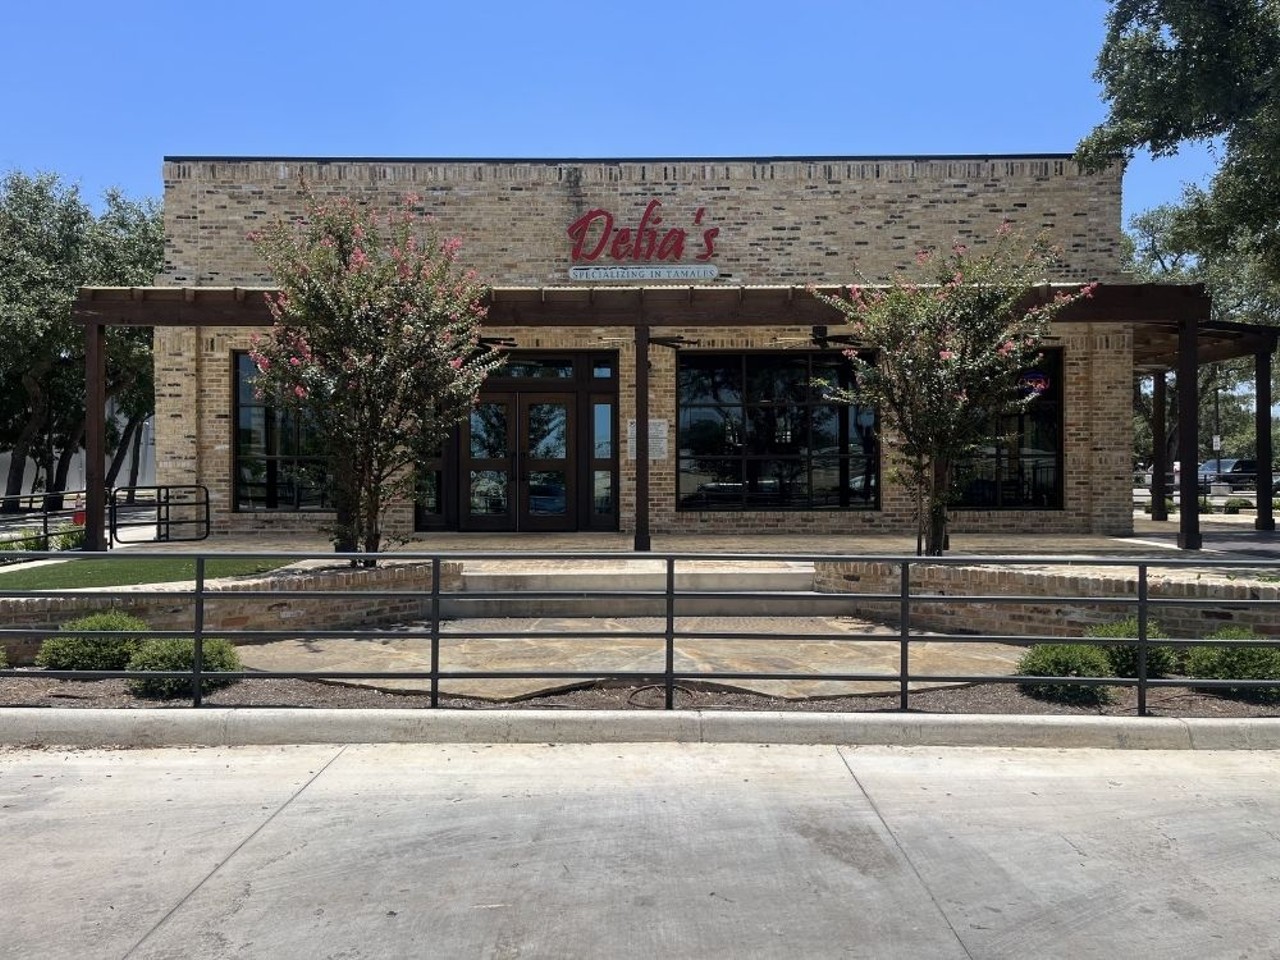 Delia’s
13527 Hausman Pass, (210) 864-1111, deliastamales.com
When this RGV fixture finally opened a storefront in SA, folks formed long lines looking to score a dozen tamales. Delia’s offers classic options like pork, chicken and Veracruzano, but it’s possible to kick things up a notch with a specialty order, like chicken and cheese cooked in green sauce. If a trip to the Hausman location isn’t in the cards, Delia’s tamales are still on the menu, since the chain ships nationwide.